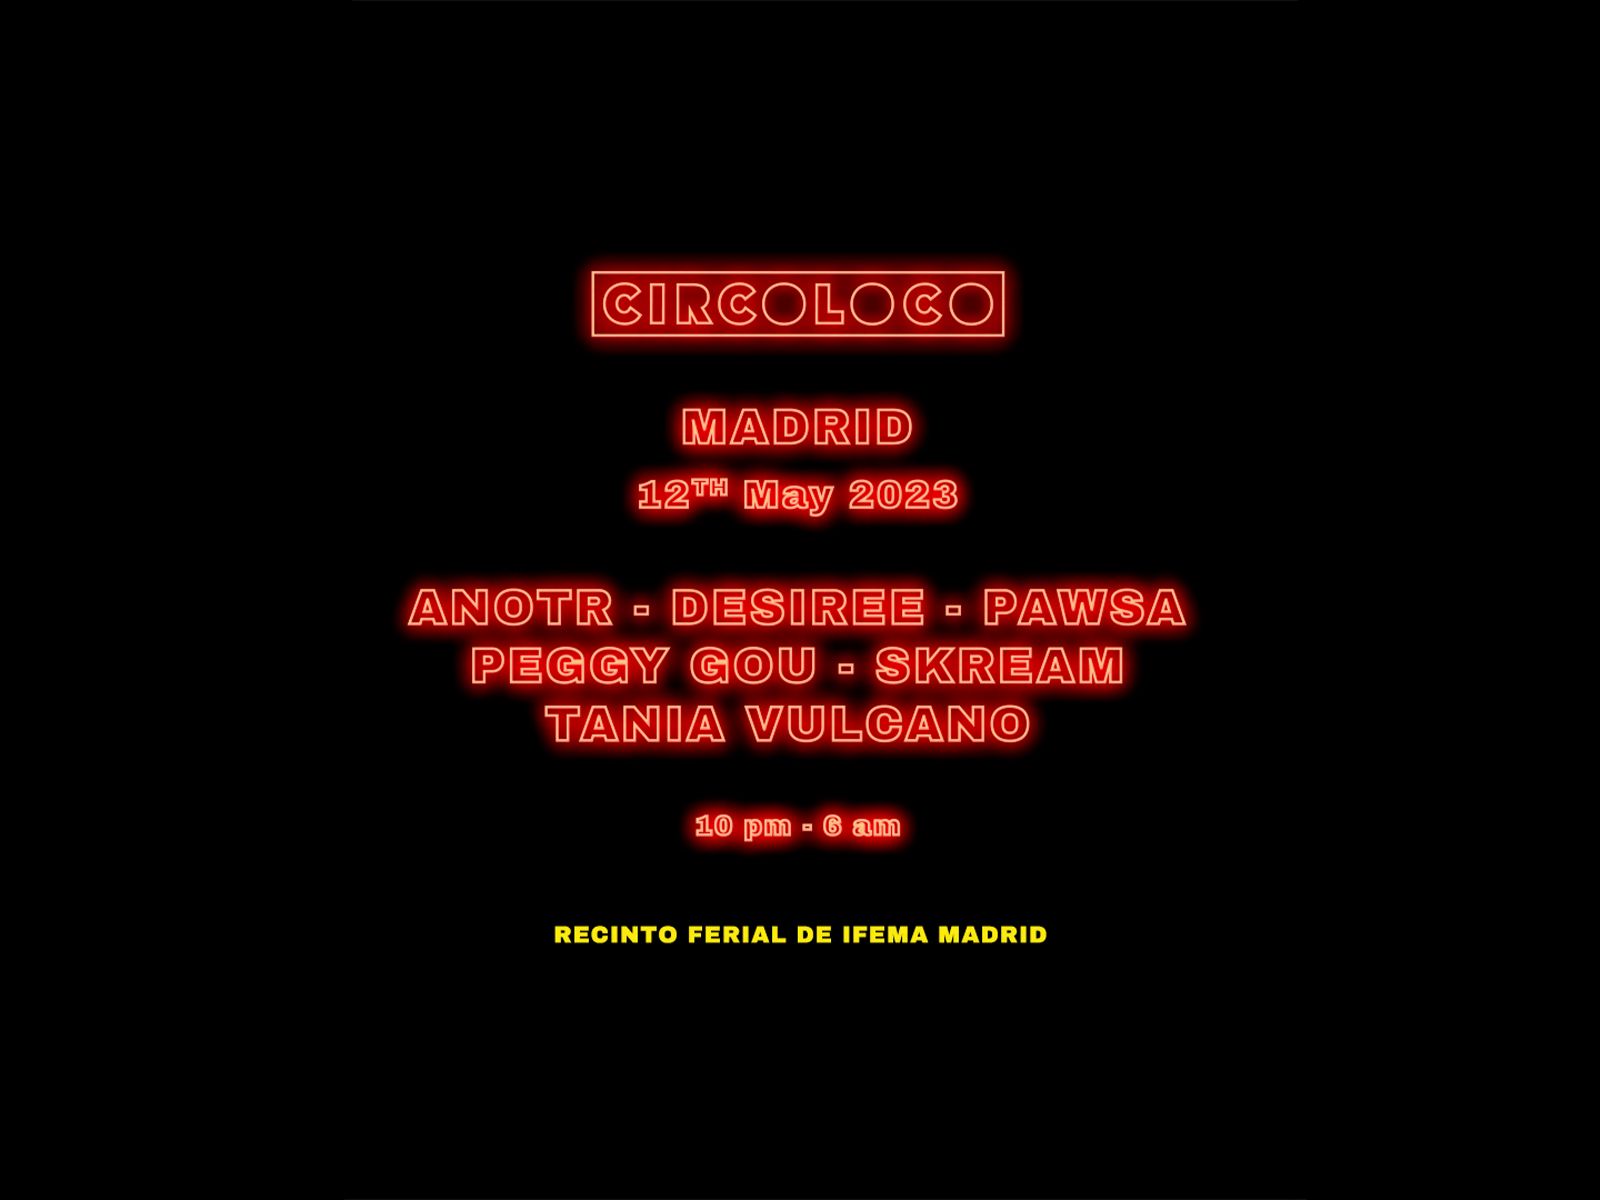 CIRCOLOCO lands in Madrid with Peggy Gou and more artists